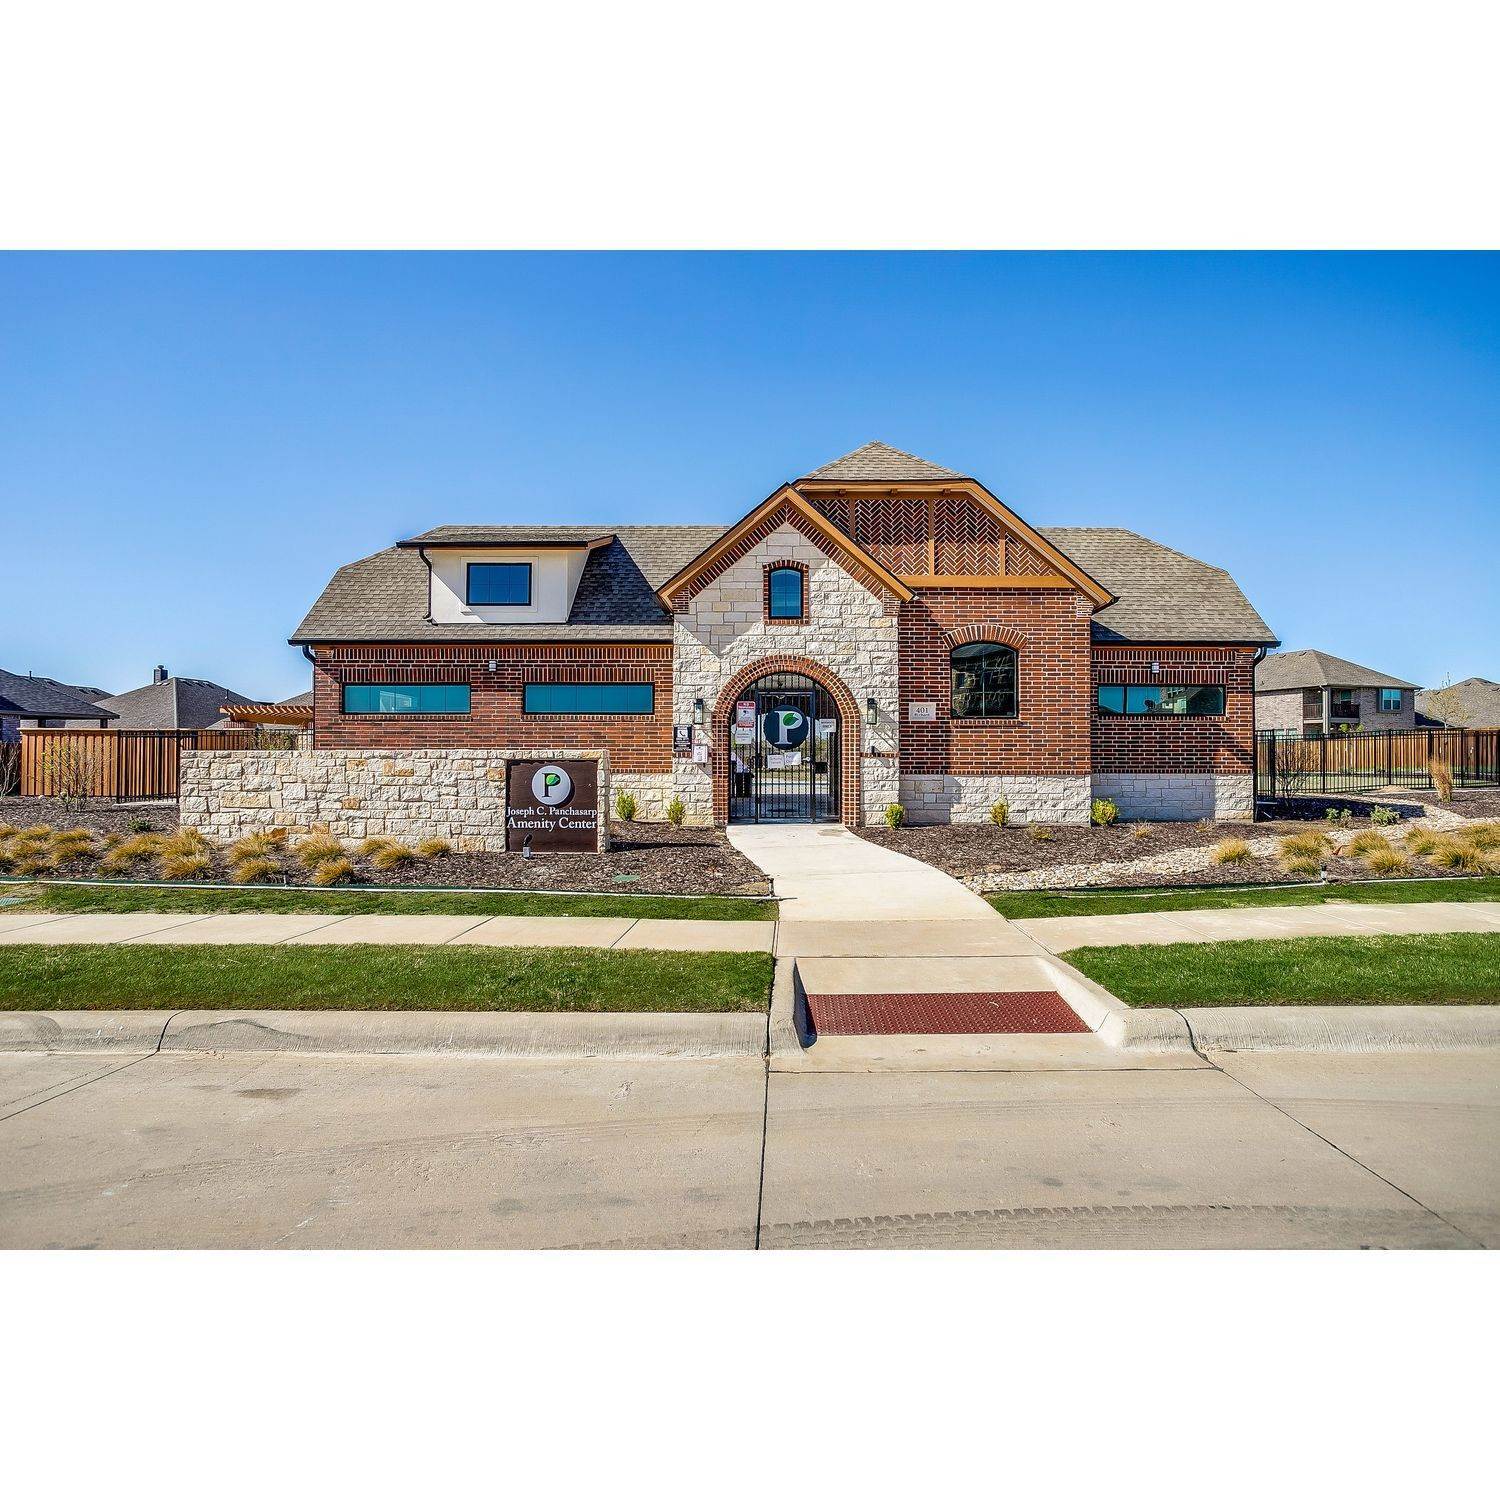 325 Richard St, Burleson, TX 76028에 The Parks at Panchasarp Farms Phase 2 건물